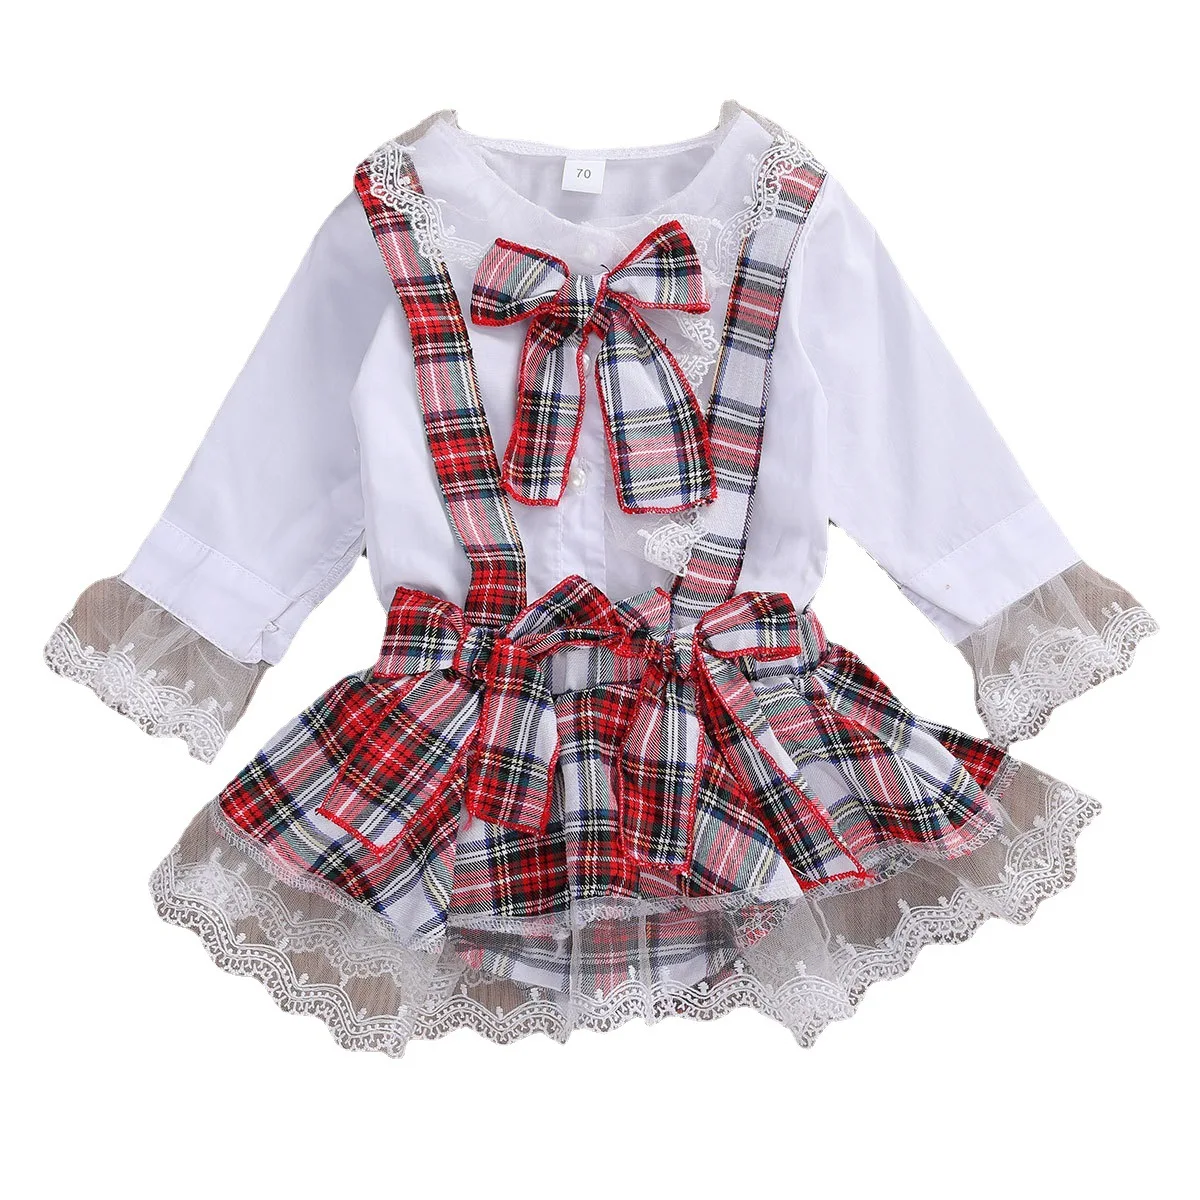 

Girls foreign trade children clothing long-sleeved lace stitching bowknot cute college style suspender skirt infant baby clothes